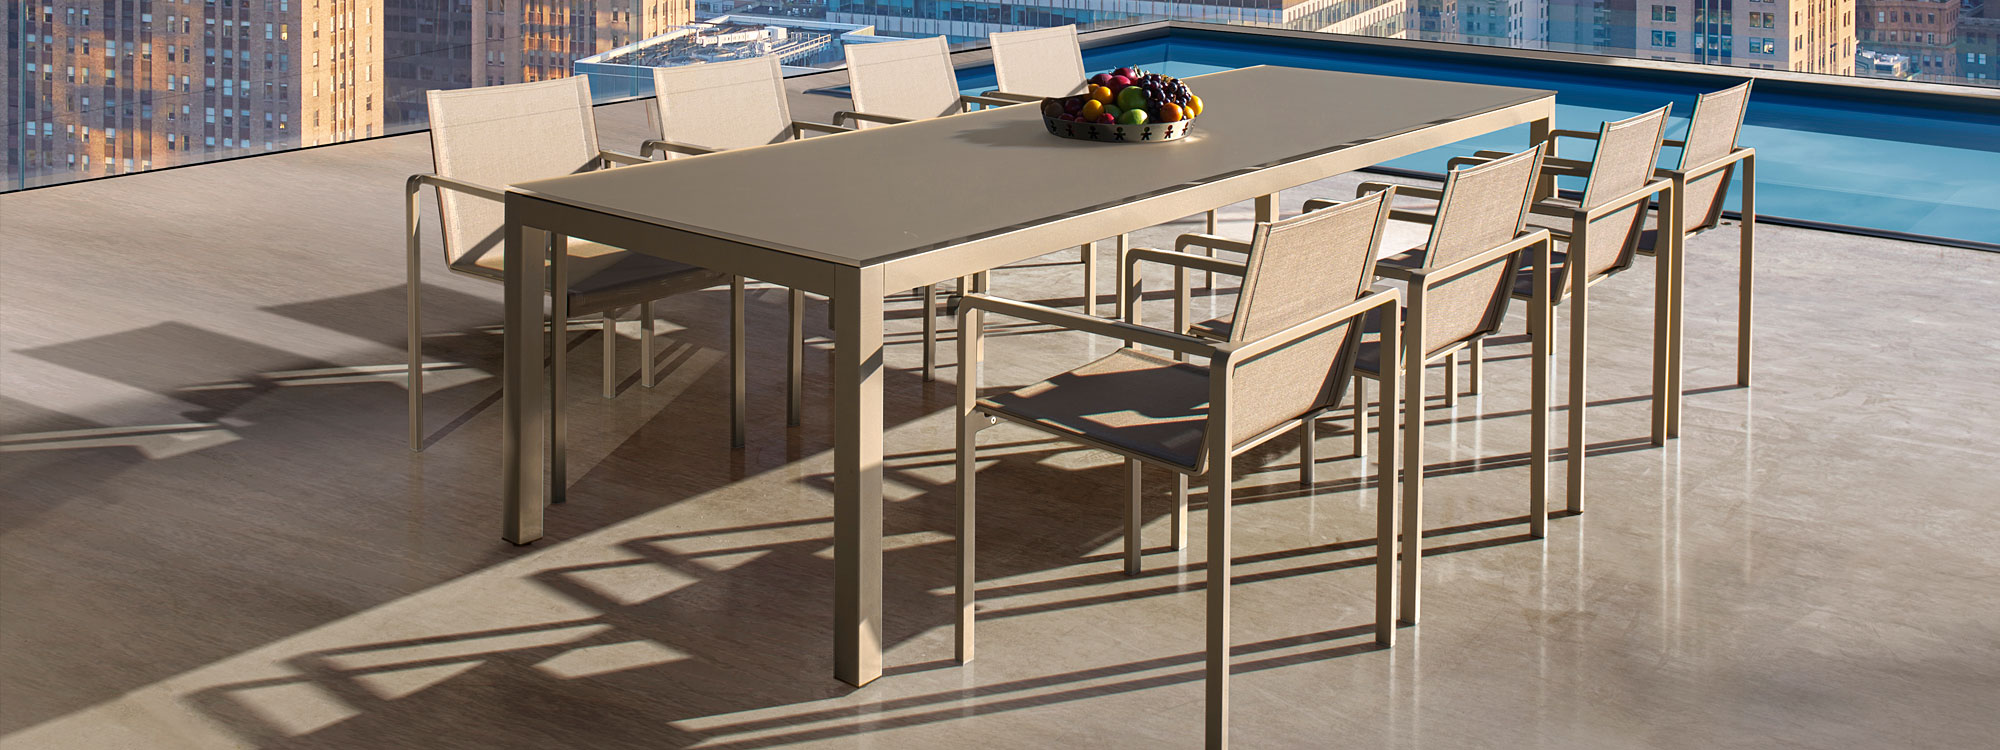 Image of city rooftop installation of sand coloured Alura garden chairs & Sand coloured Taboela table by Royal Botania